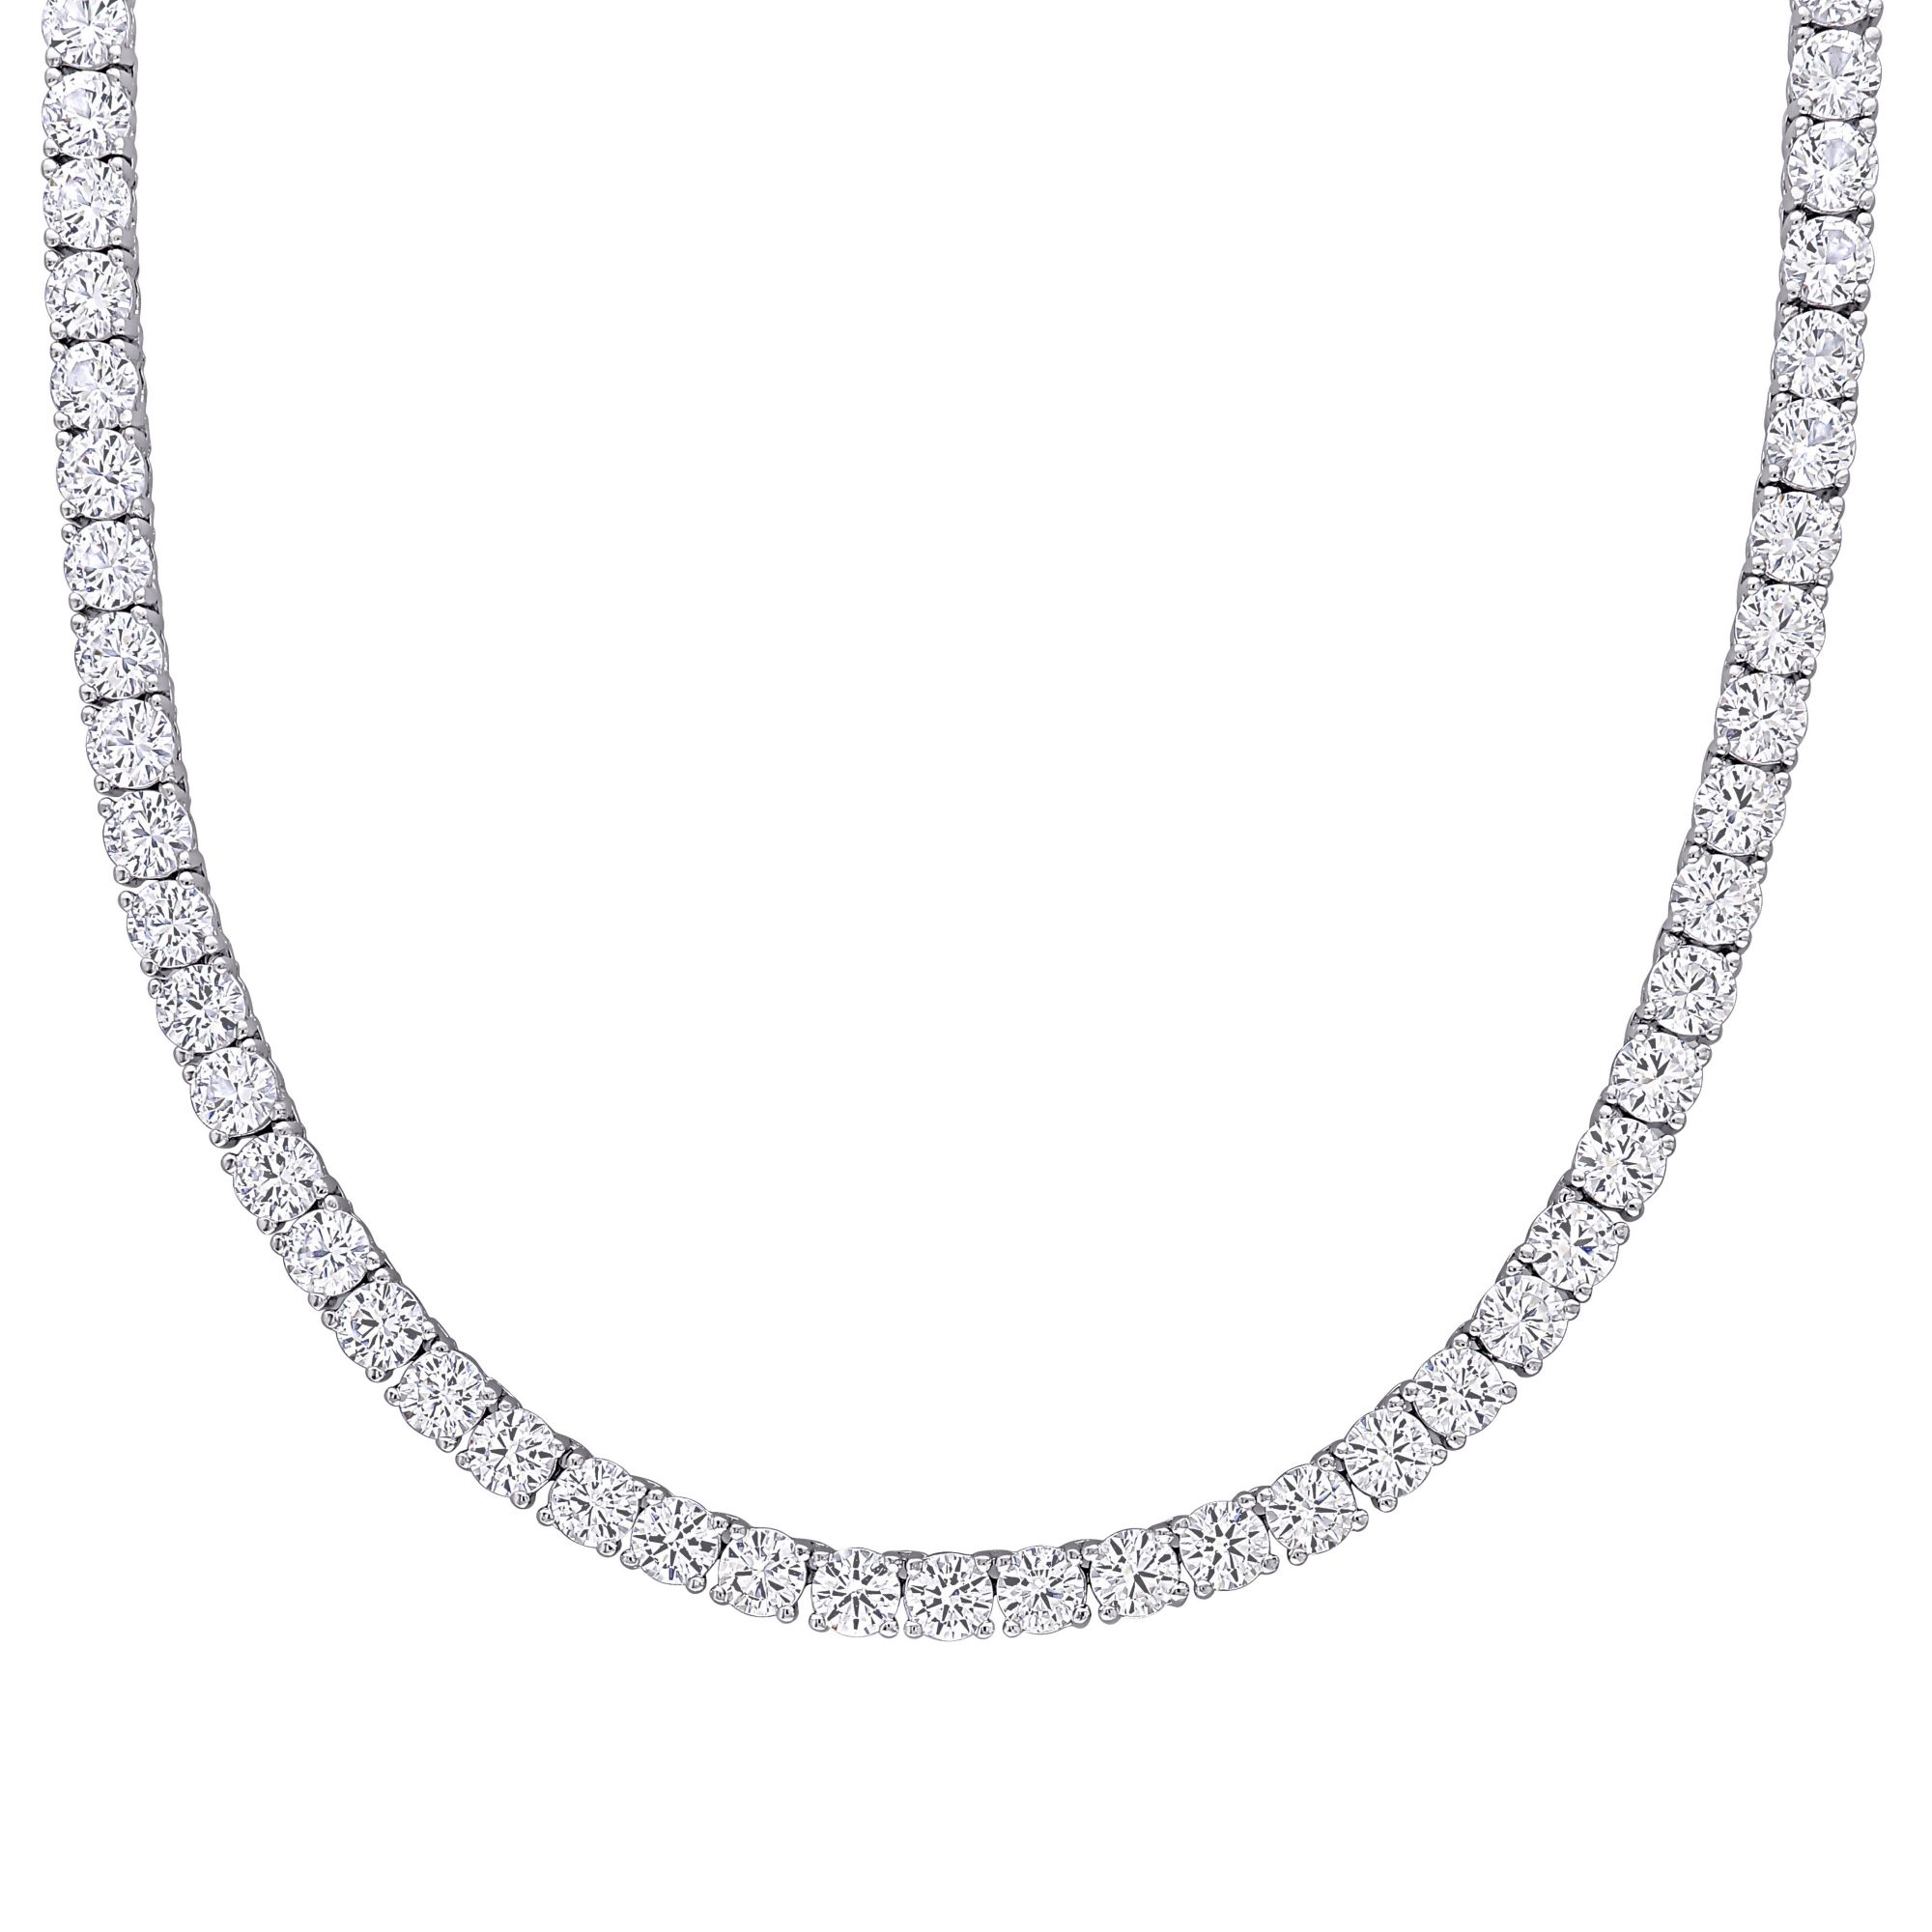 33 ct. t.g.w. Created White Sapphire Tennis Necklace in Sterling Silver